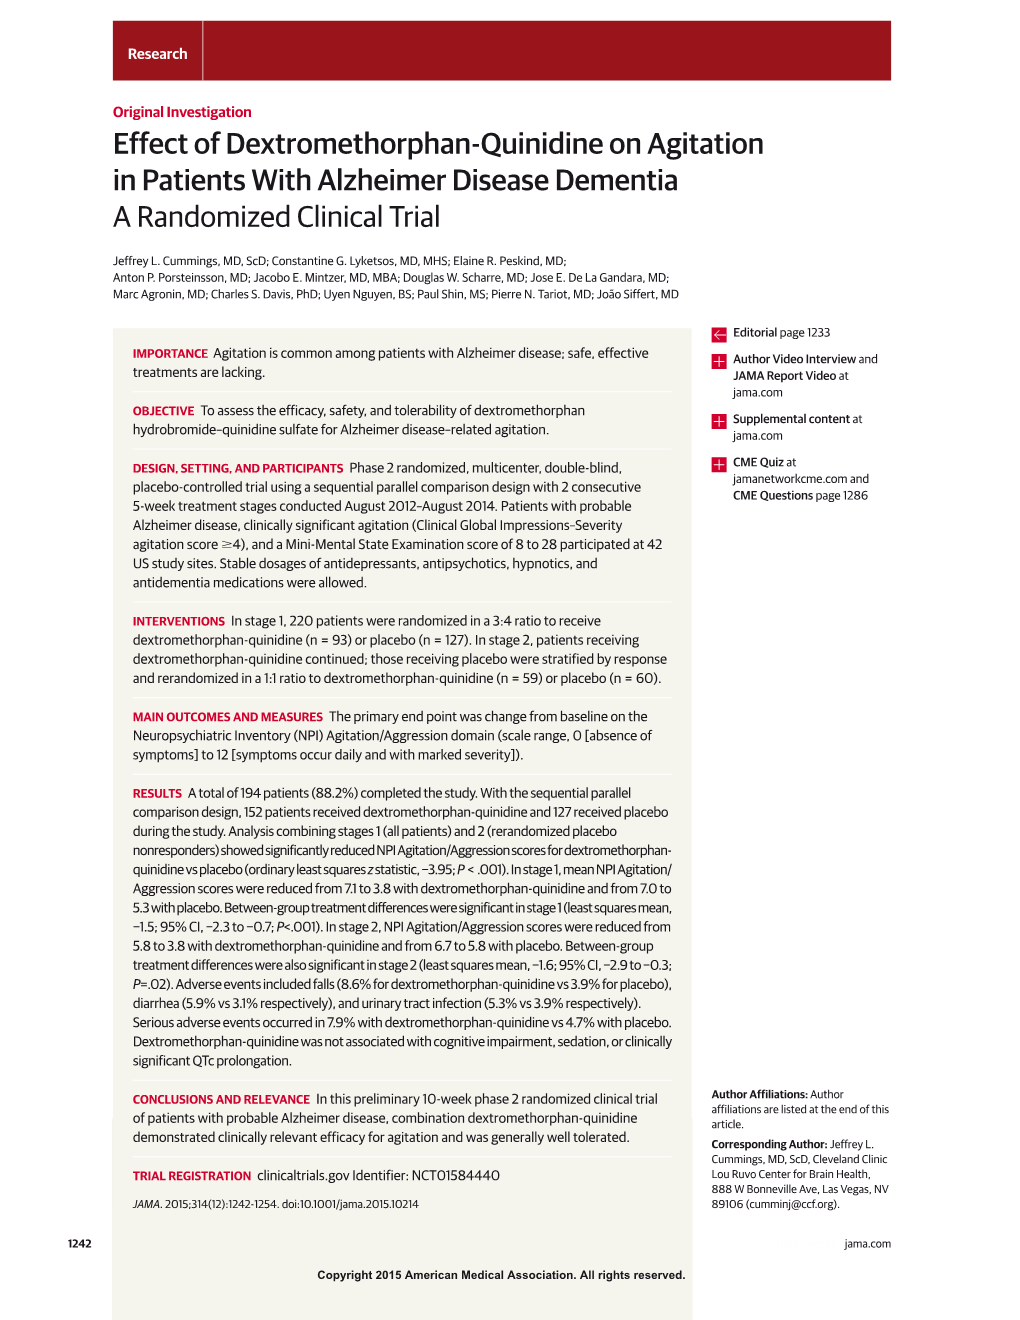 Effect of Dextromethorphan-Quinidine on Agitation in Patients with Alzheimer Disease Dementia a Randomized Clinical Trial